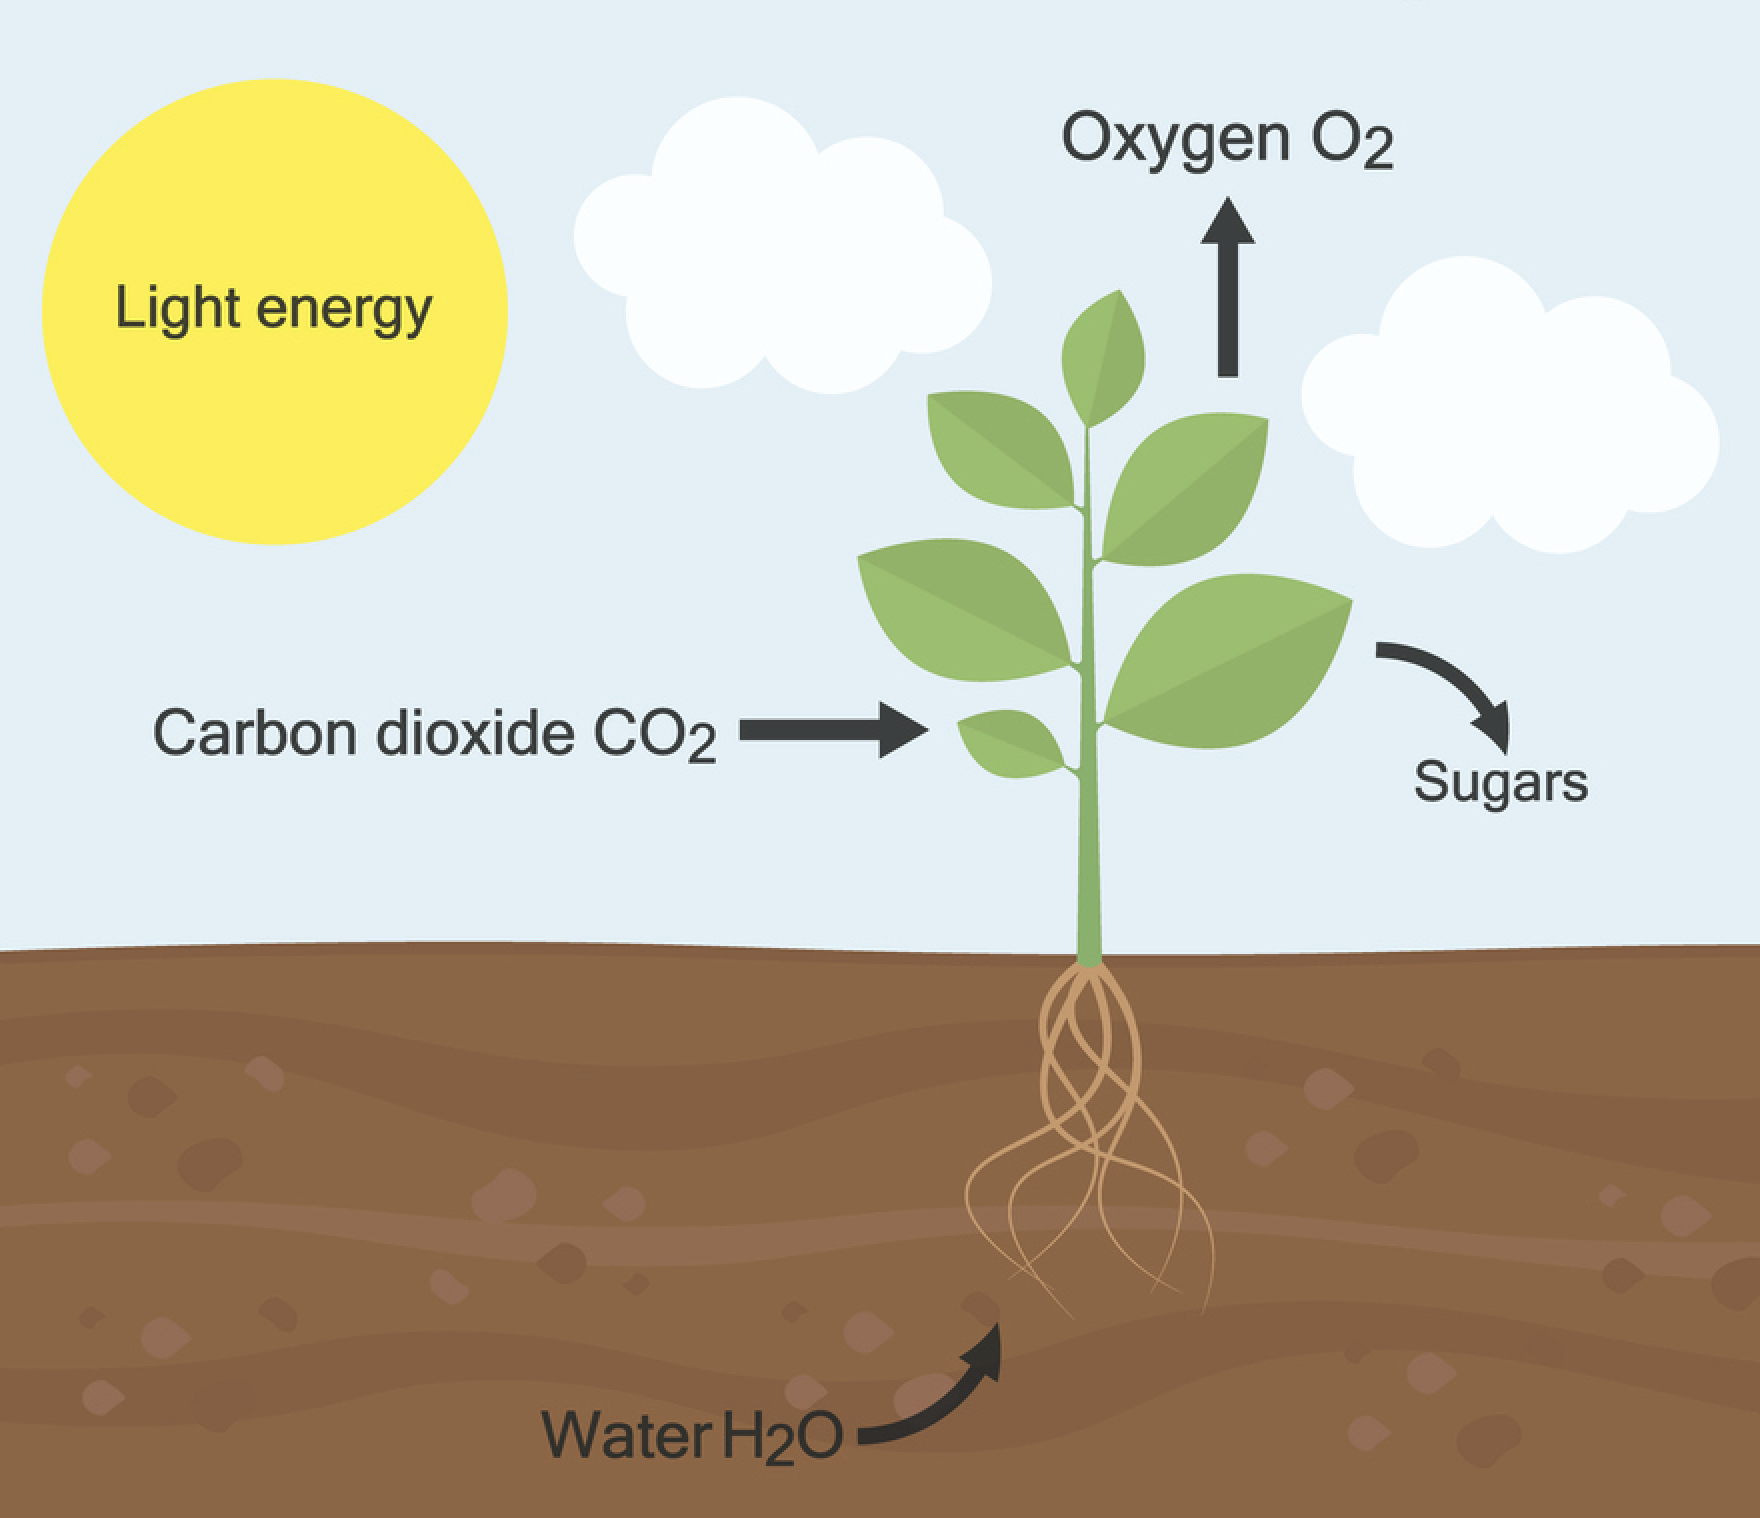 Elementary process of photosynthesis in which the plant takes in sunlight, CO2, and water, putting out O2 and sugars